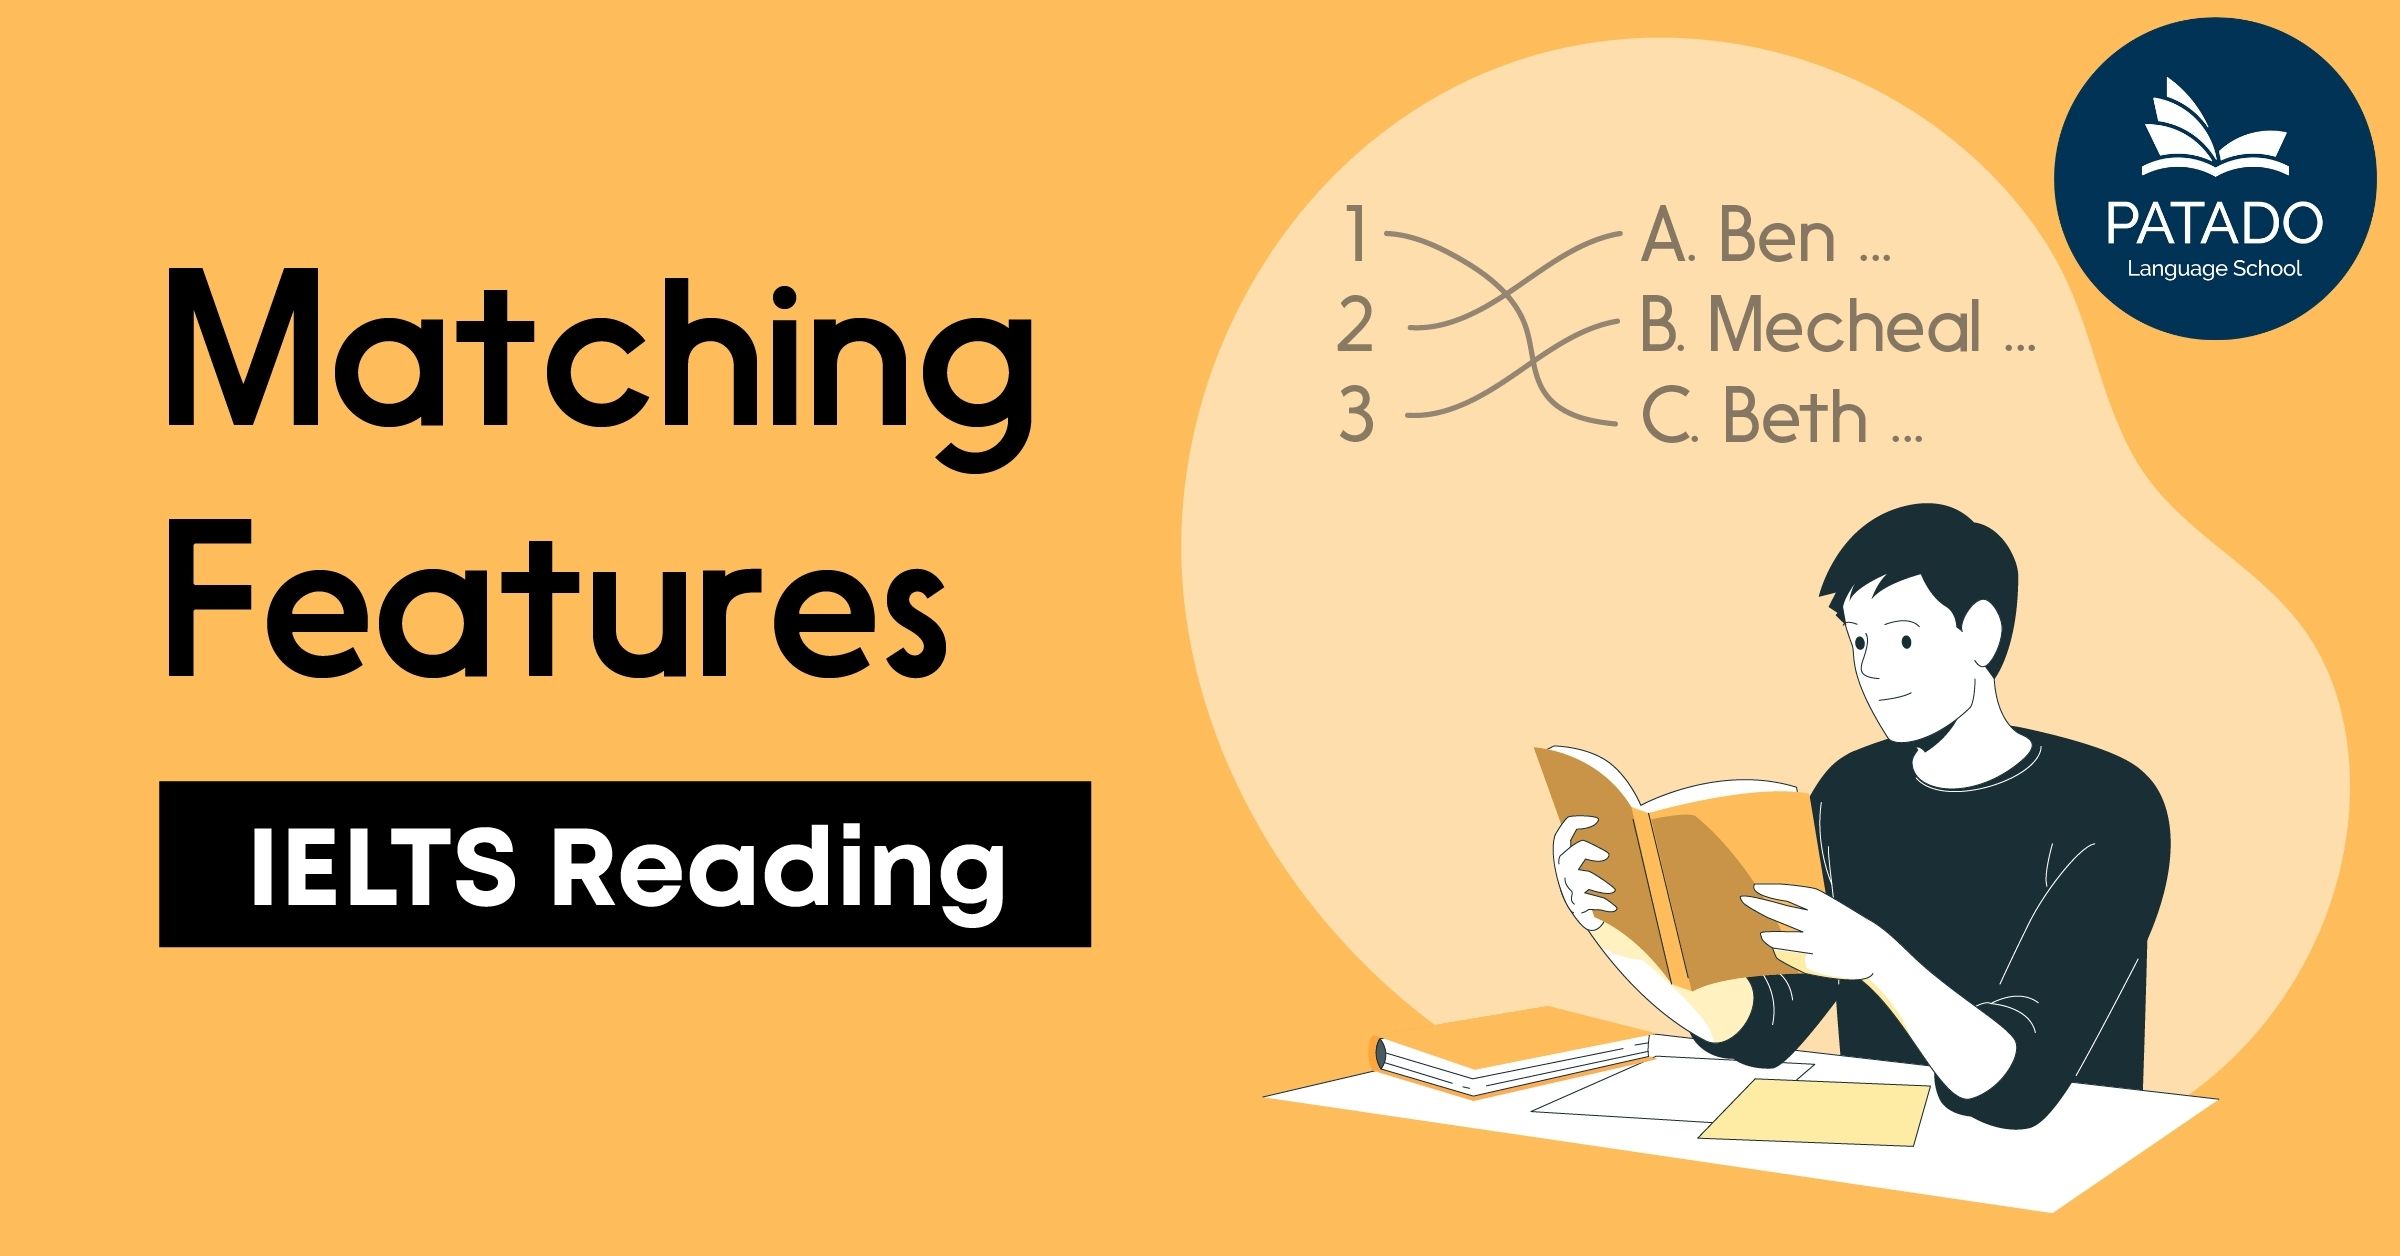 Academic Reading- Matching features